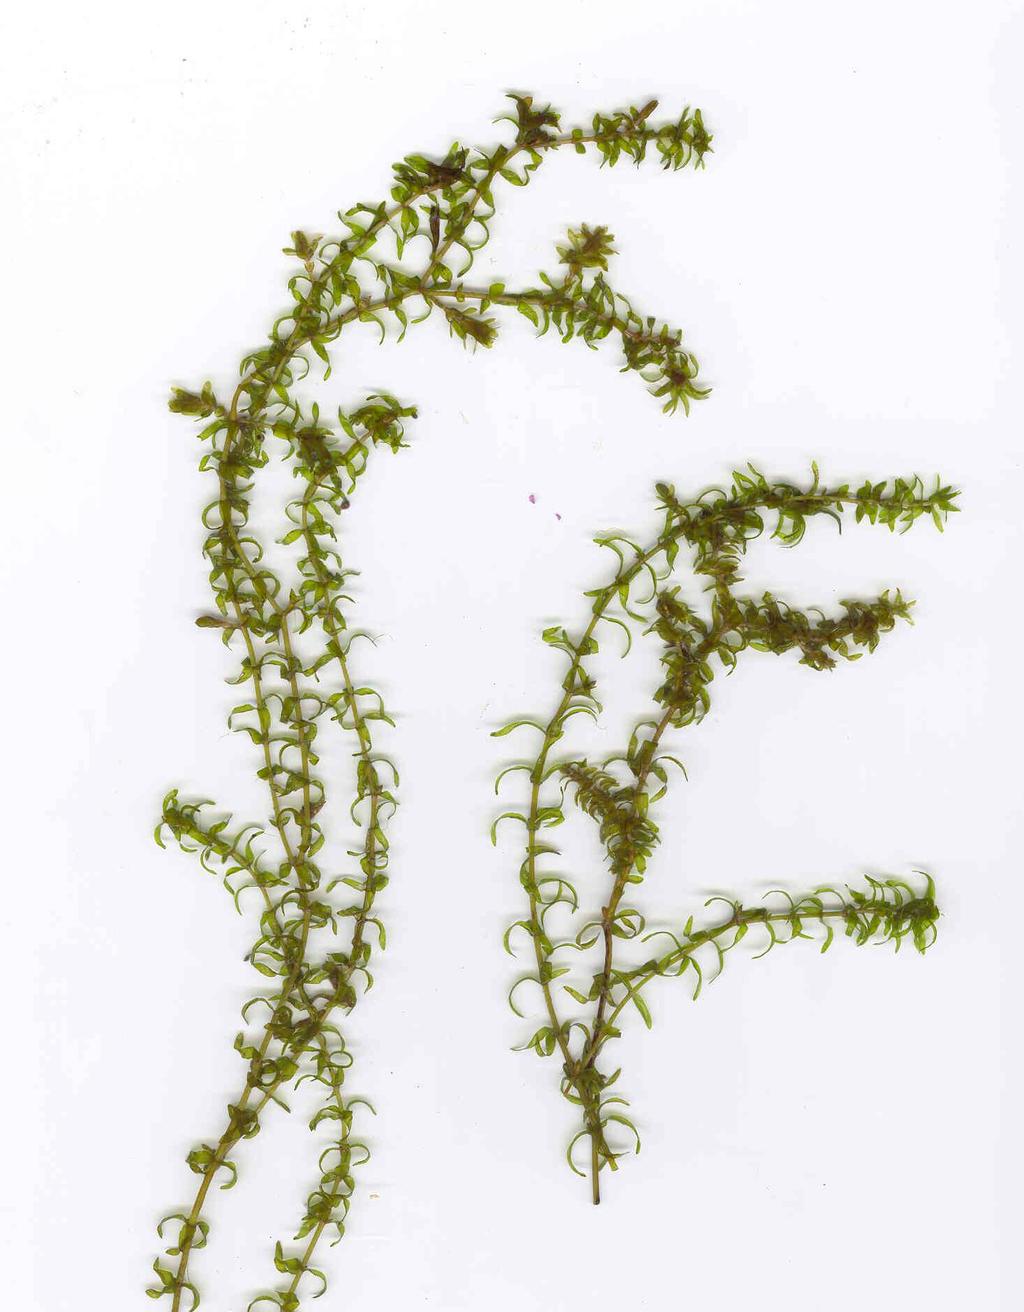 NATIVE LOOK ALIKE Waterweed Elodea canadensis HABITAT: Lakes, ponds, rivers, streams HEIGHT: Up to 2 feet long LEAVES: In whorls of 3 with smooth leaf